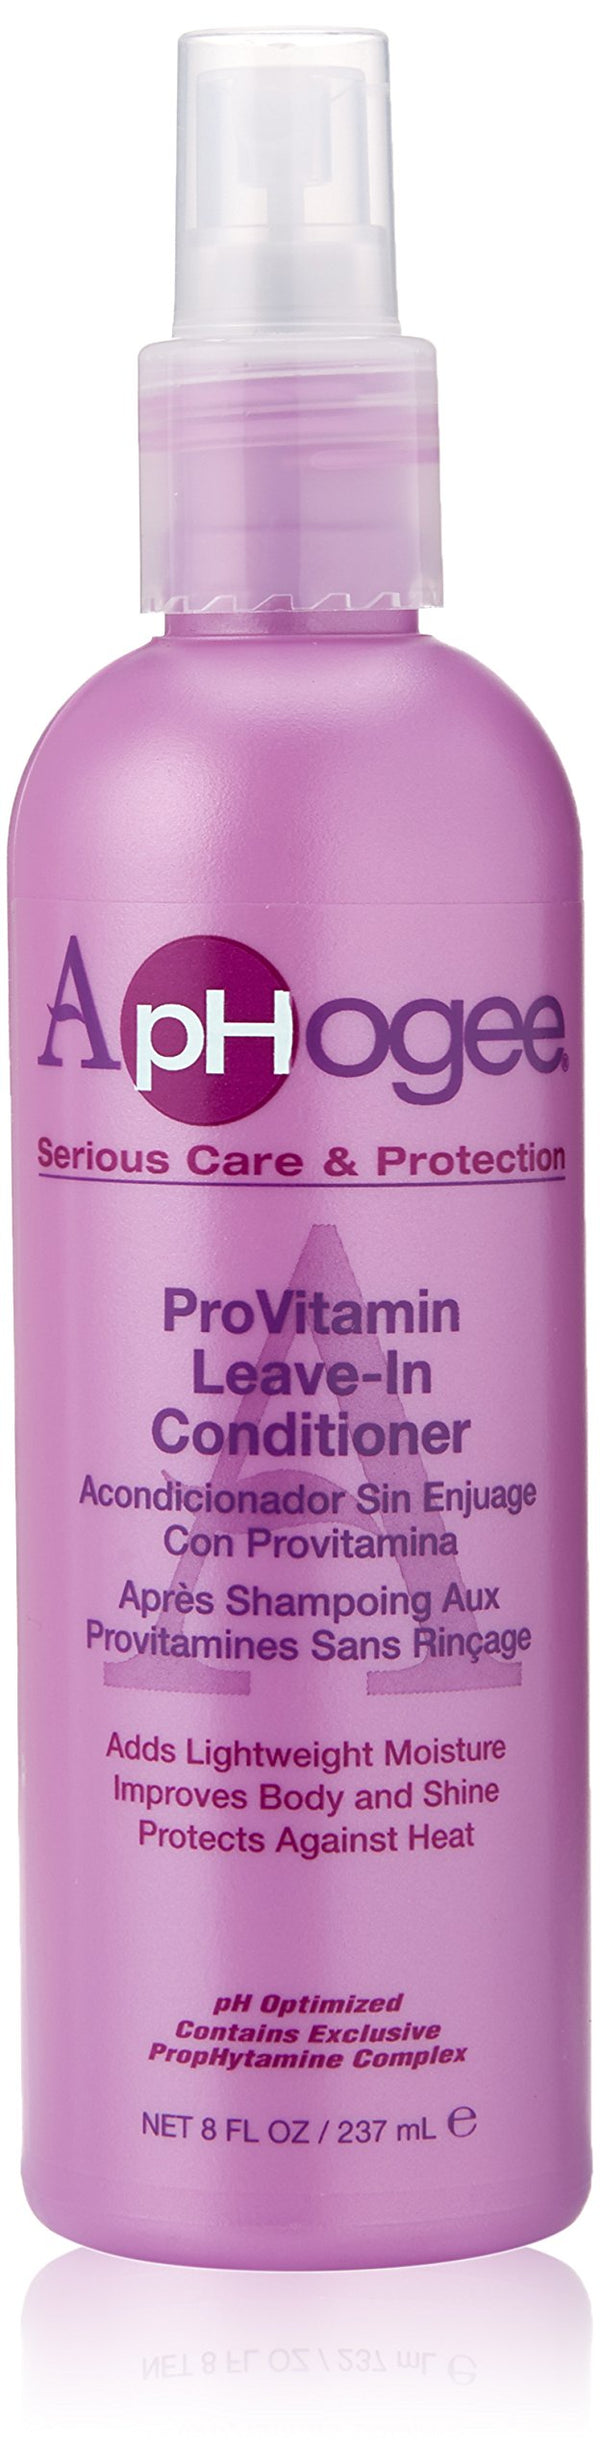 Aphogee pro vitamin Leave-in Conditioner